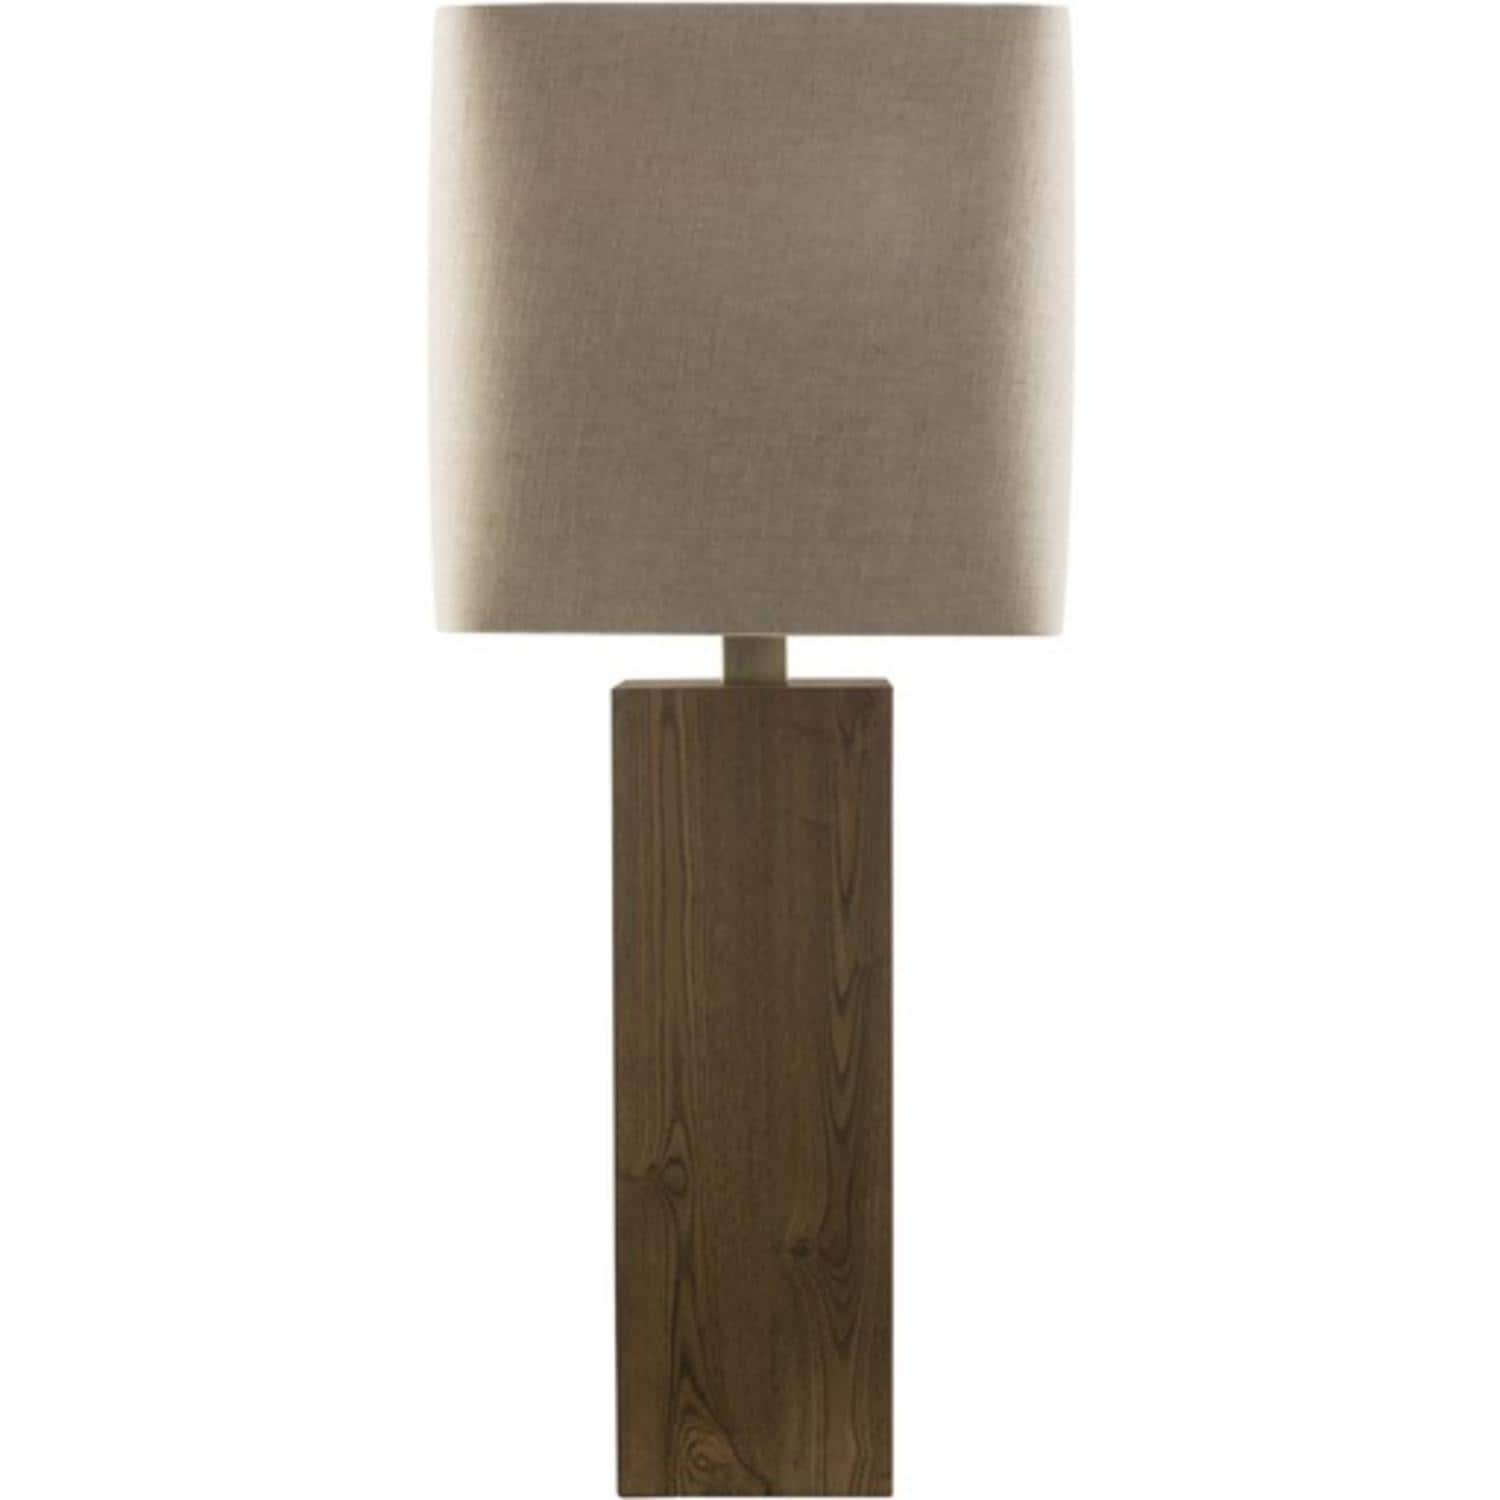 Featured image of post Rectangular Wooden Table Lamp - Designer table lamps at sensible prices.